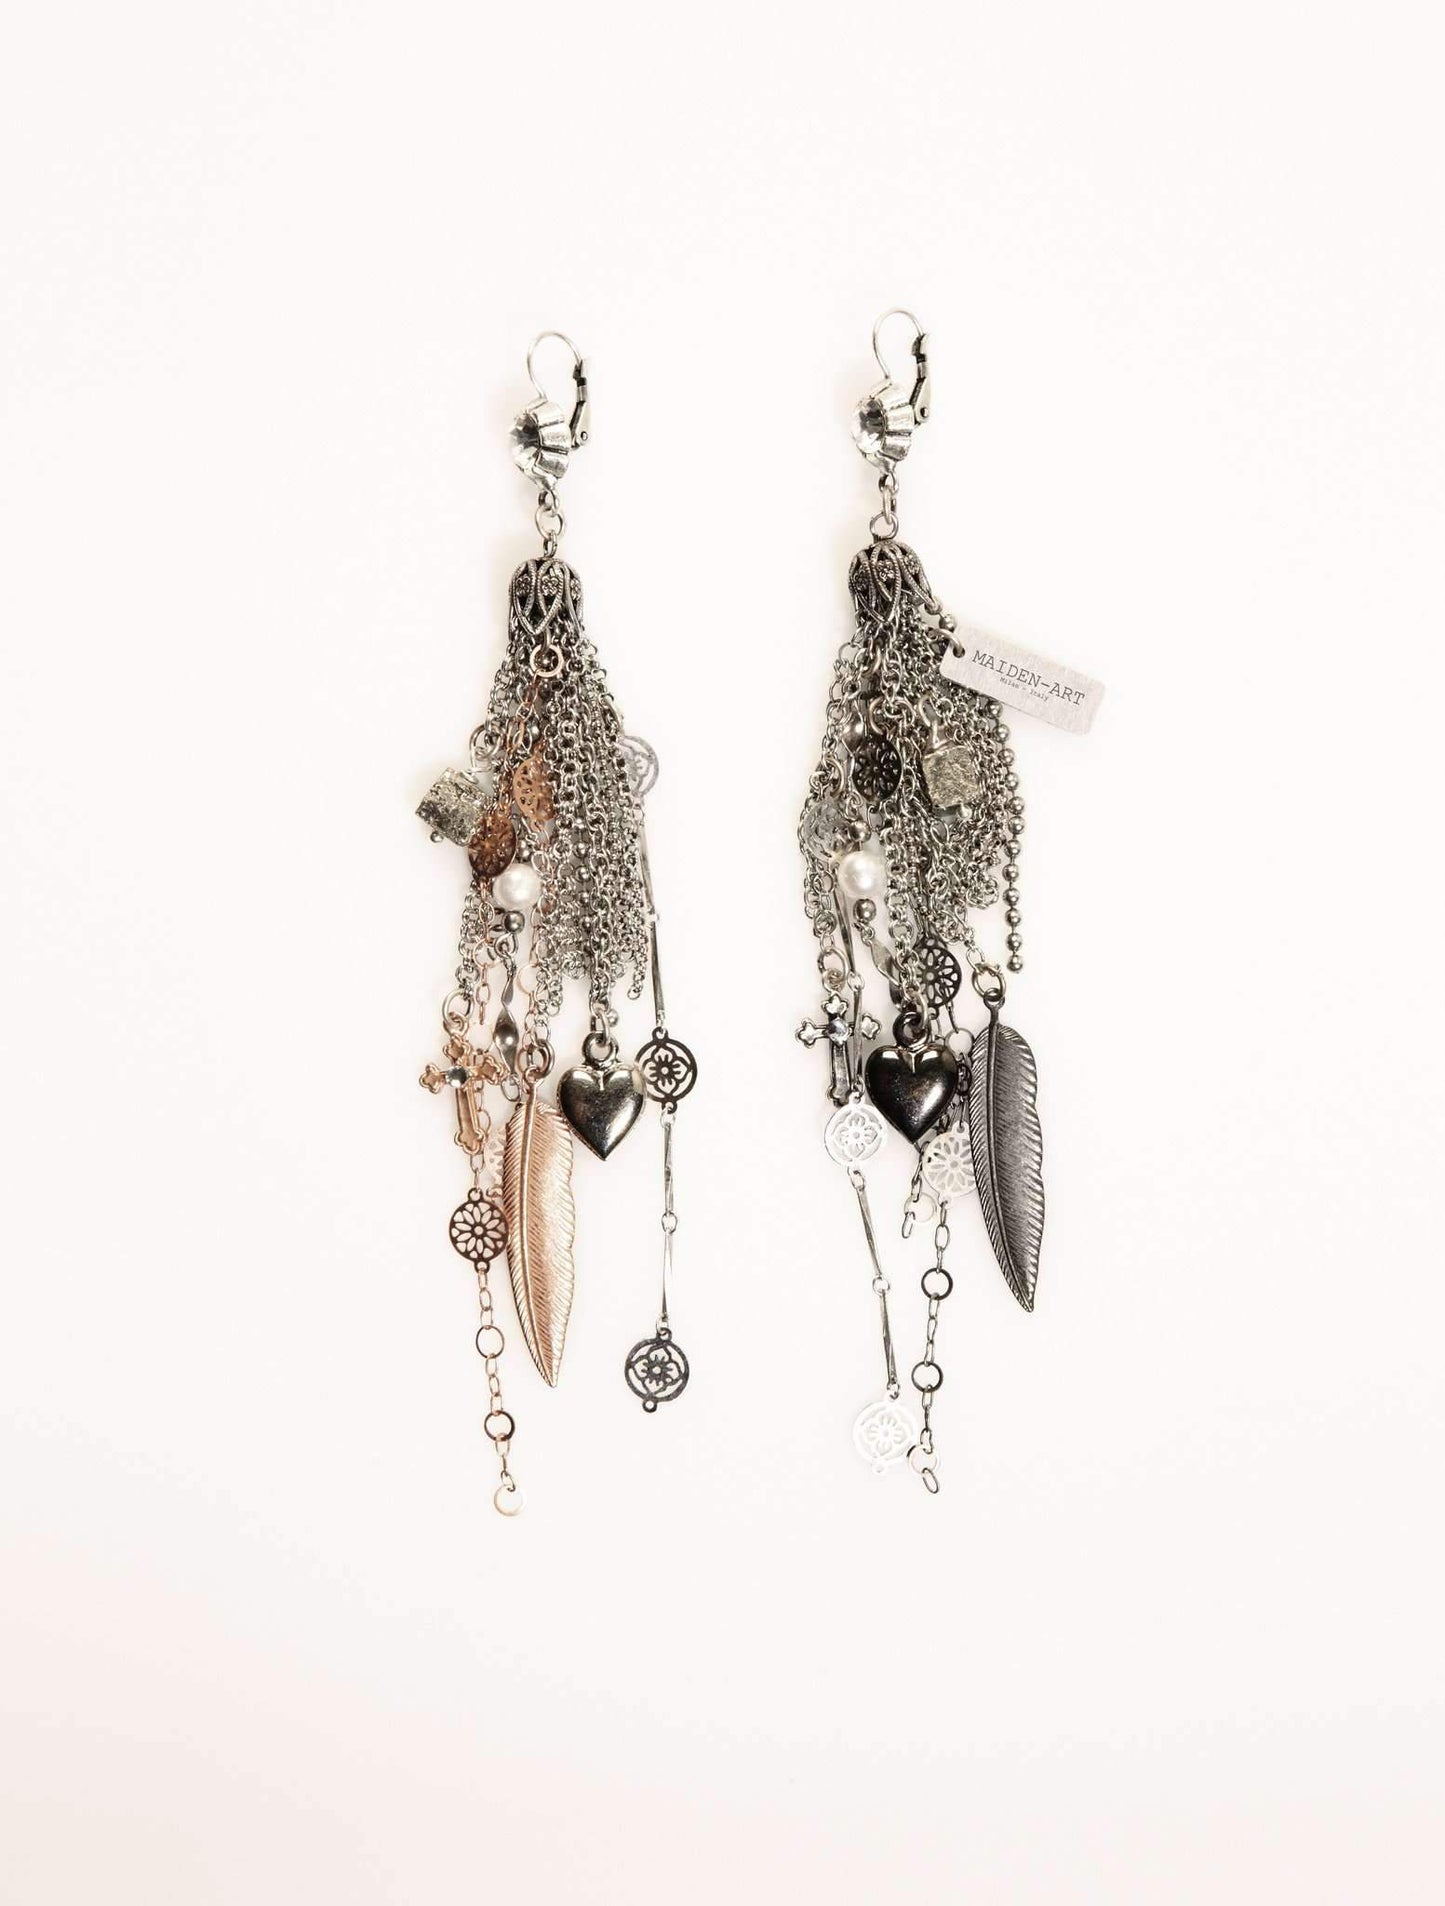 Tassel earrings with antique silver, rose gold and charms. Boho chic